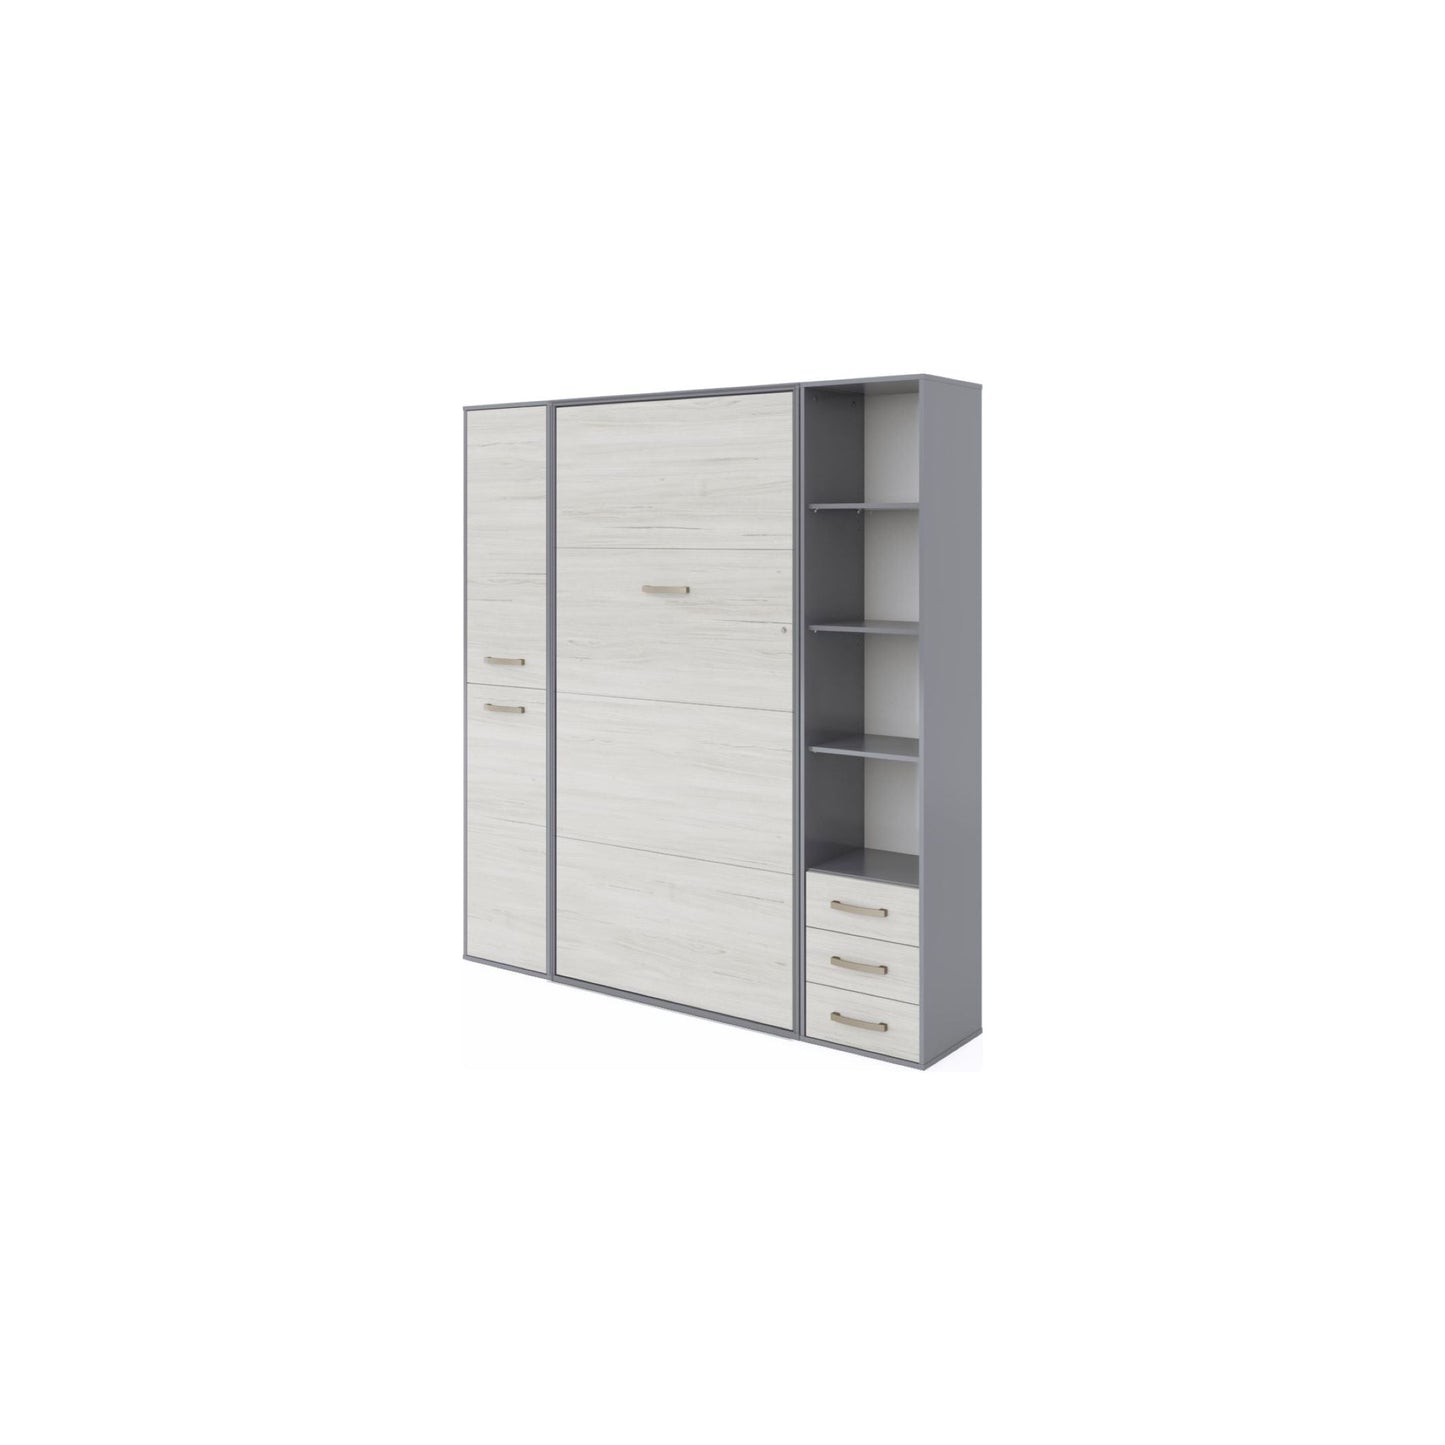 Maxima House Maxima House Invento Vertical Wall Bed, European Twin Size with 2 cabinets Grey/White Monaco IN90V-08/09GW